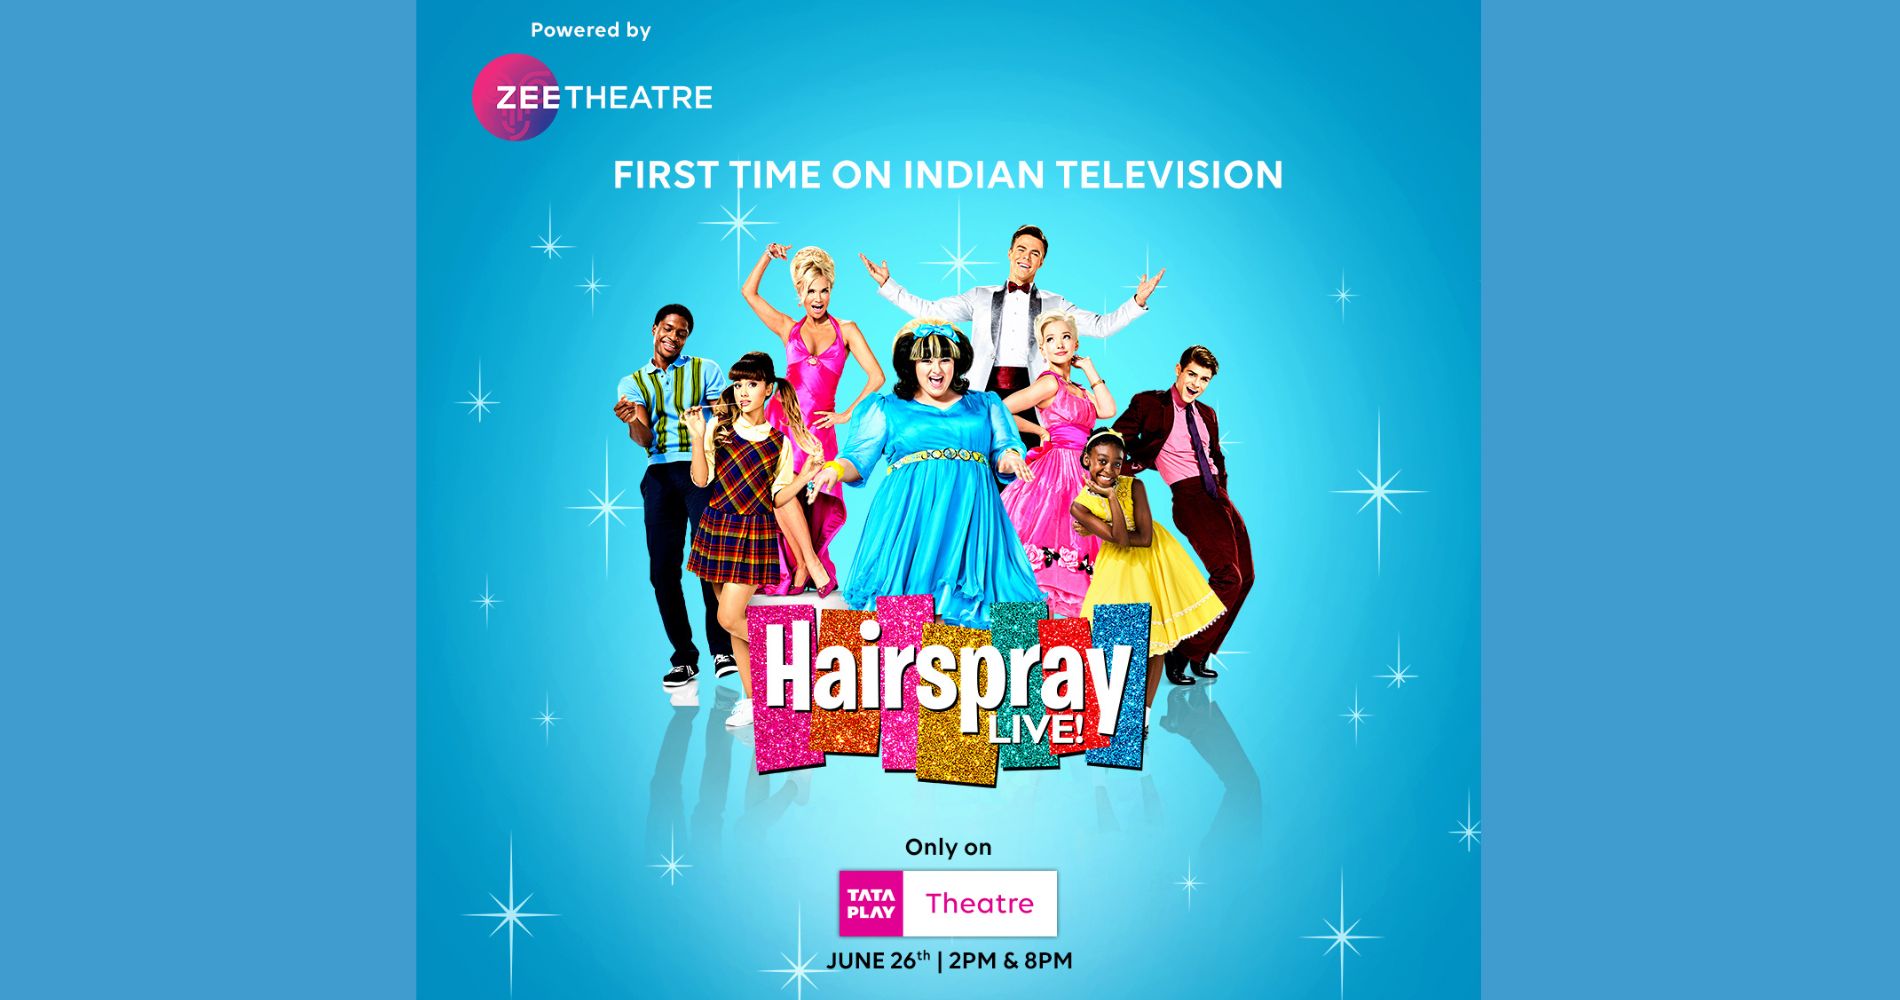 Zee Theatre brings 'Hairspray Live!', Much loved Emmy-winning musical to Indian television